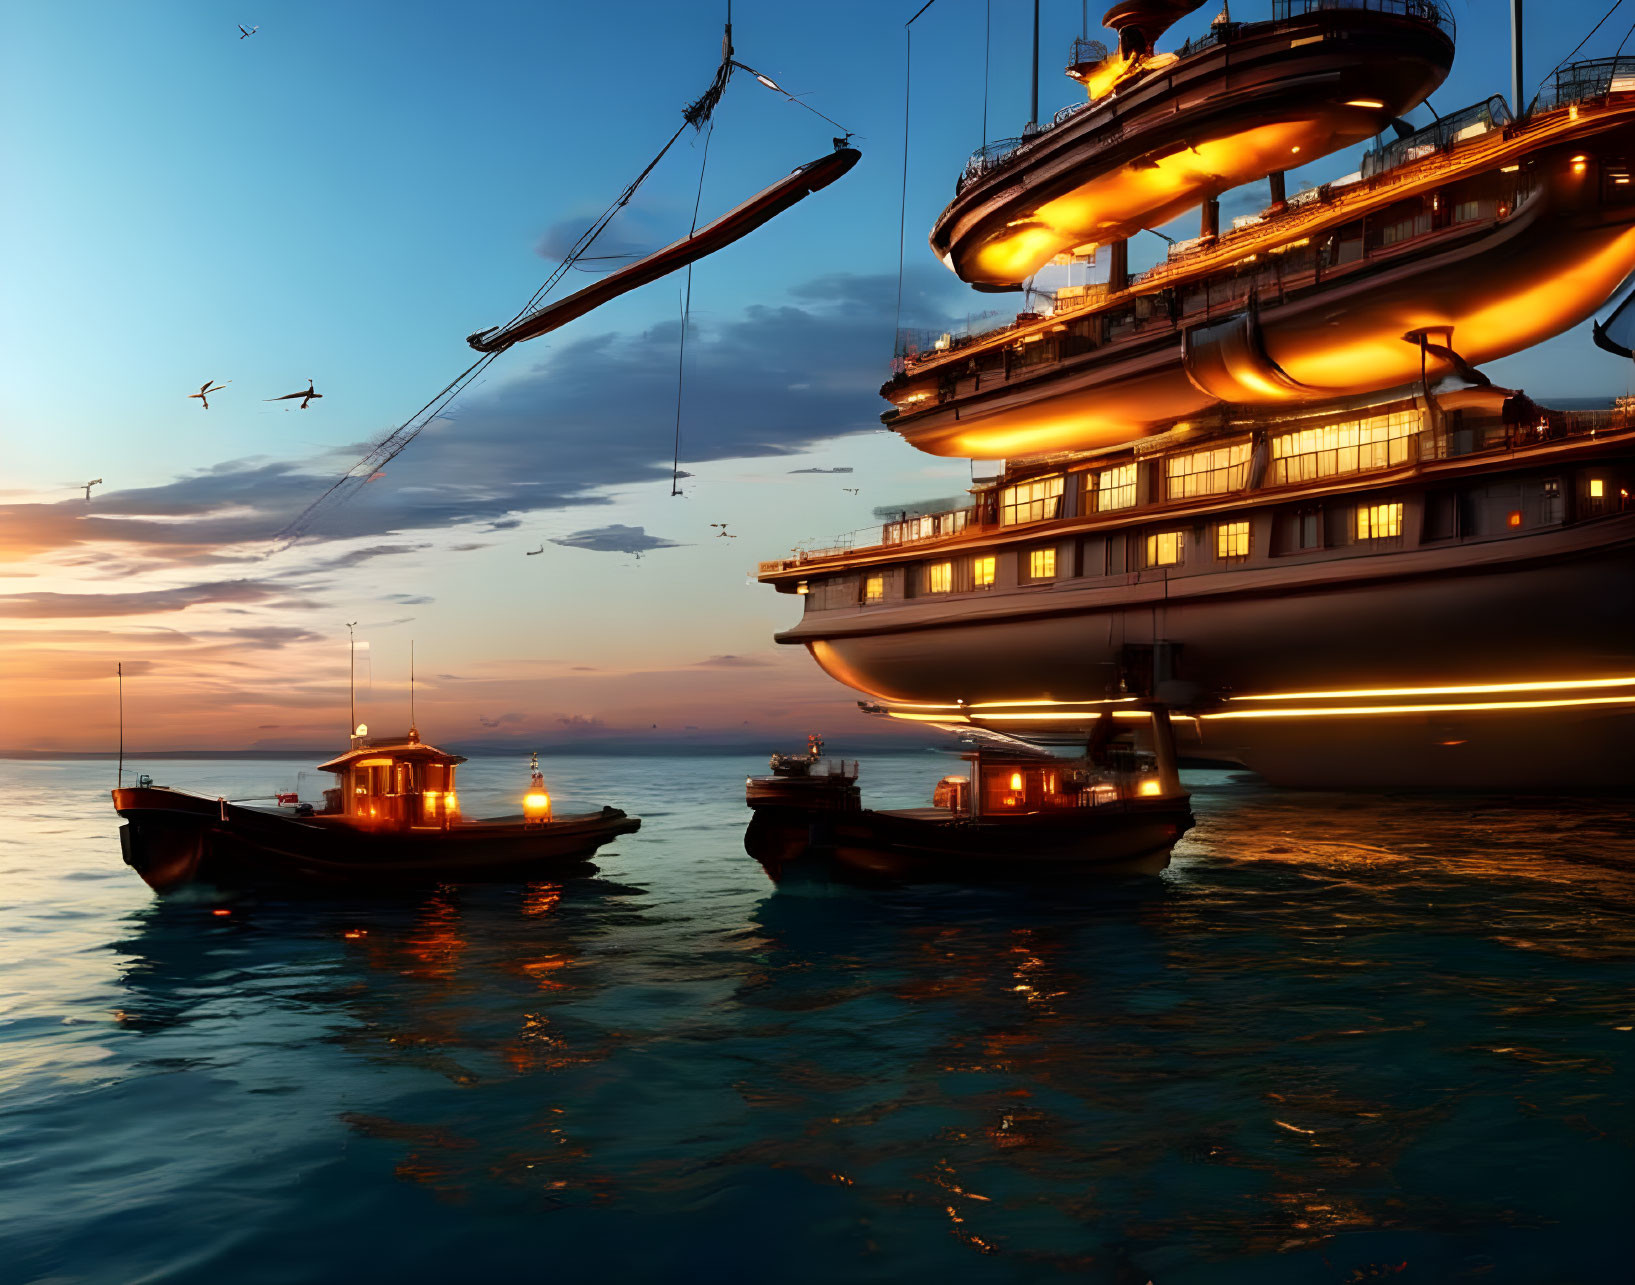 Traditional boats near futuristic airship at sunset on water with birds and clouds